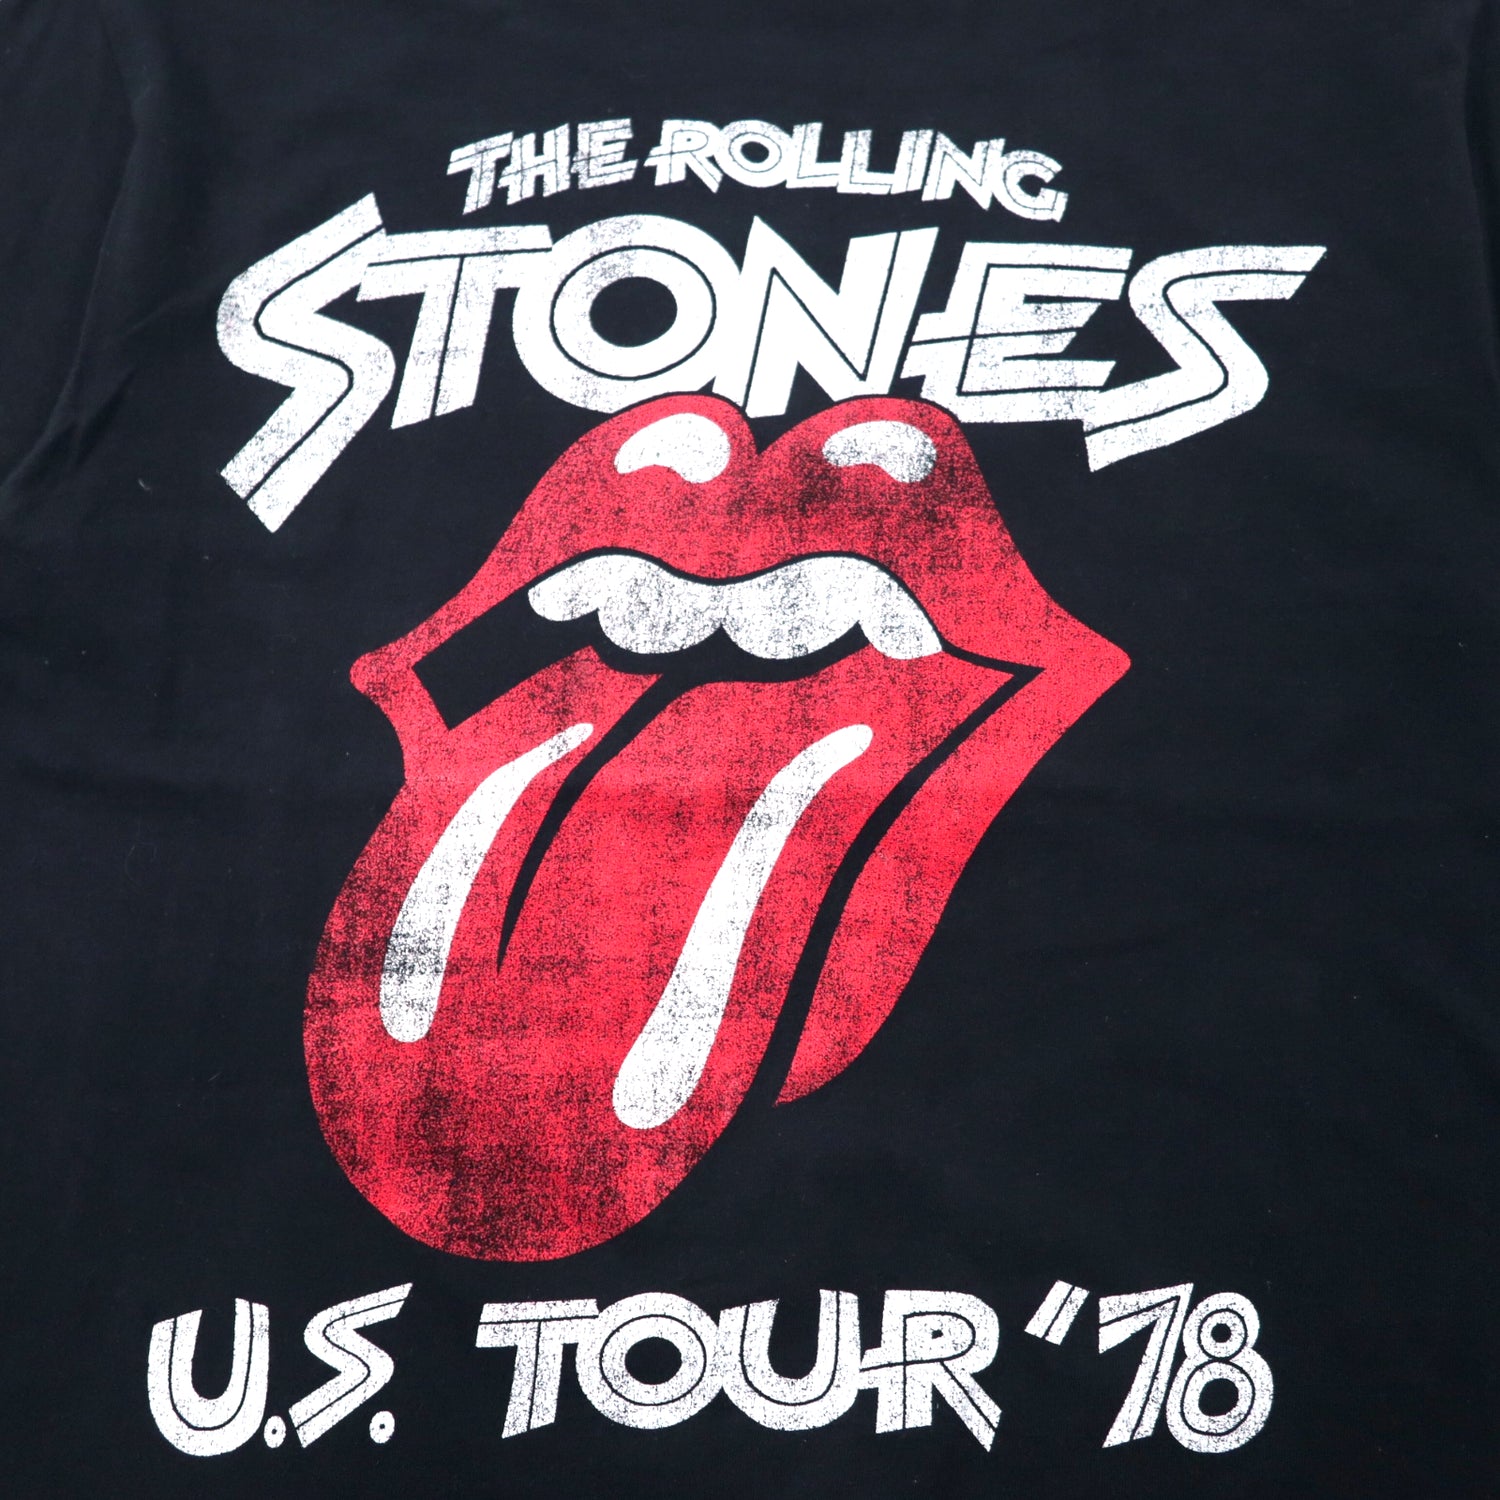 THE ROLLING STONES Rolling Stones Band T-Shirt LG Black Cotton ...